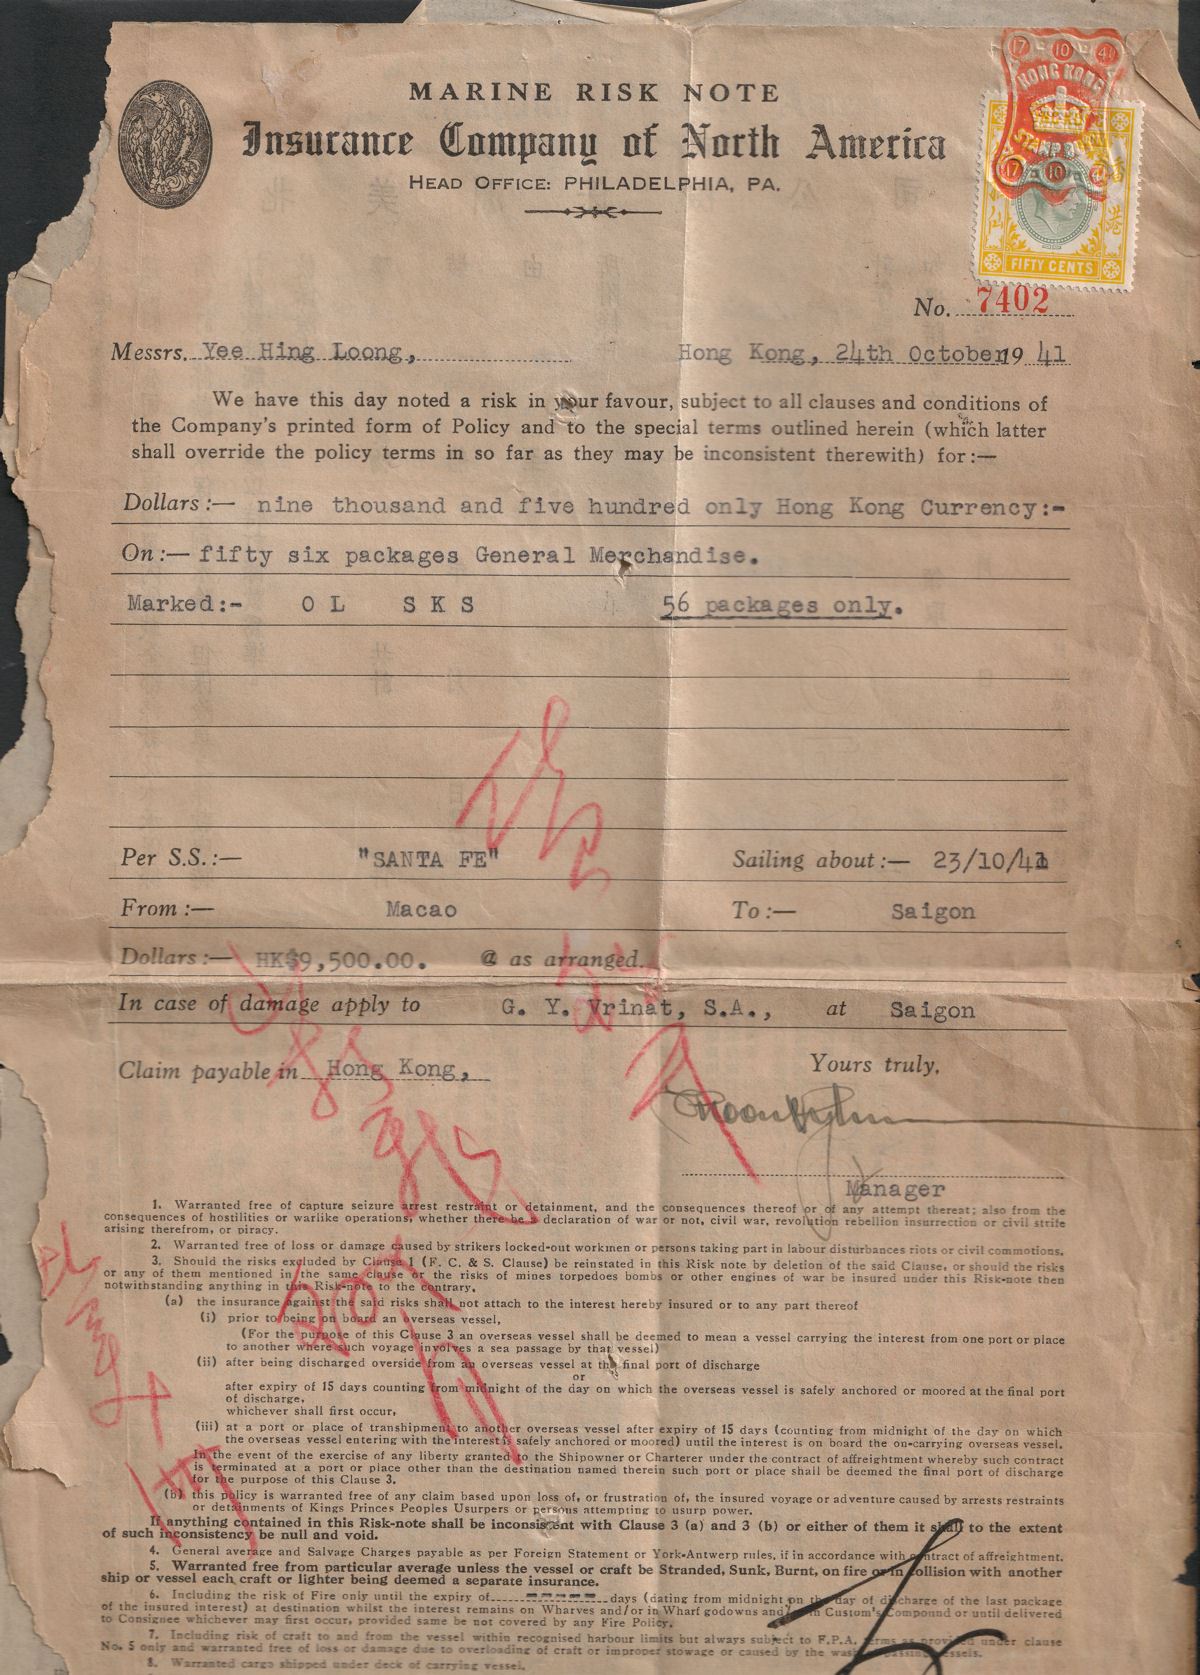 Hong Kong 1941 KGVI Stamp Duty 50c Used on Marine Risk Note for Macao to Saigon